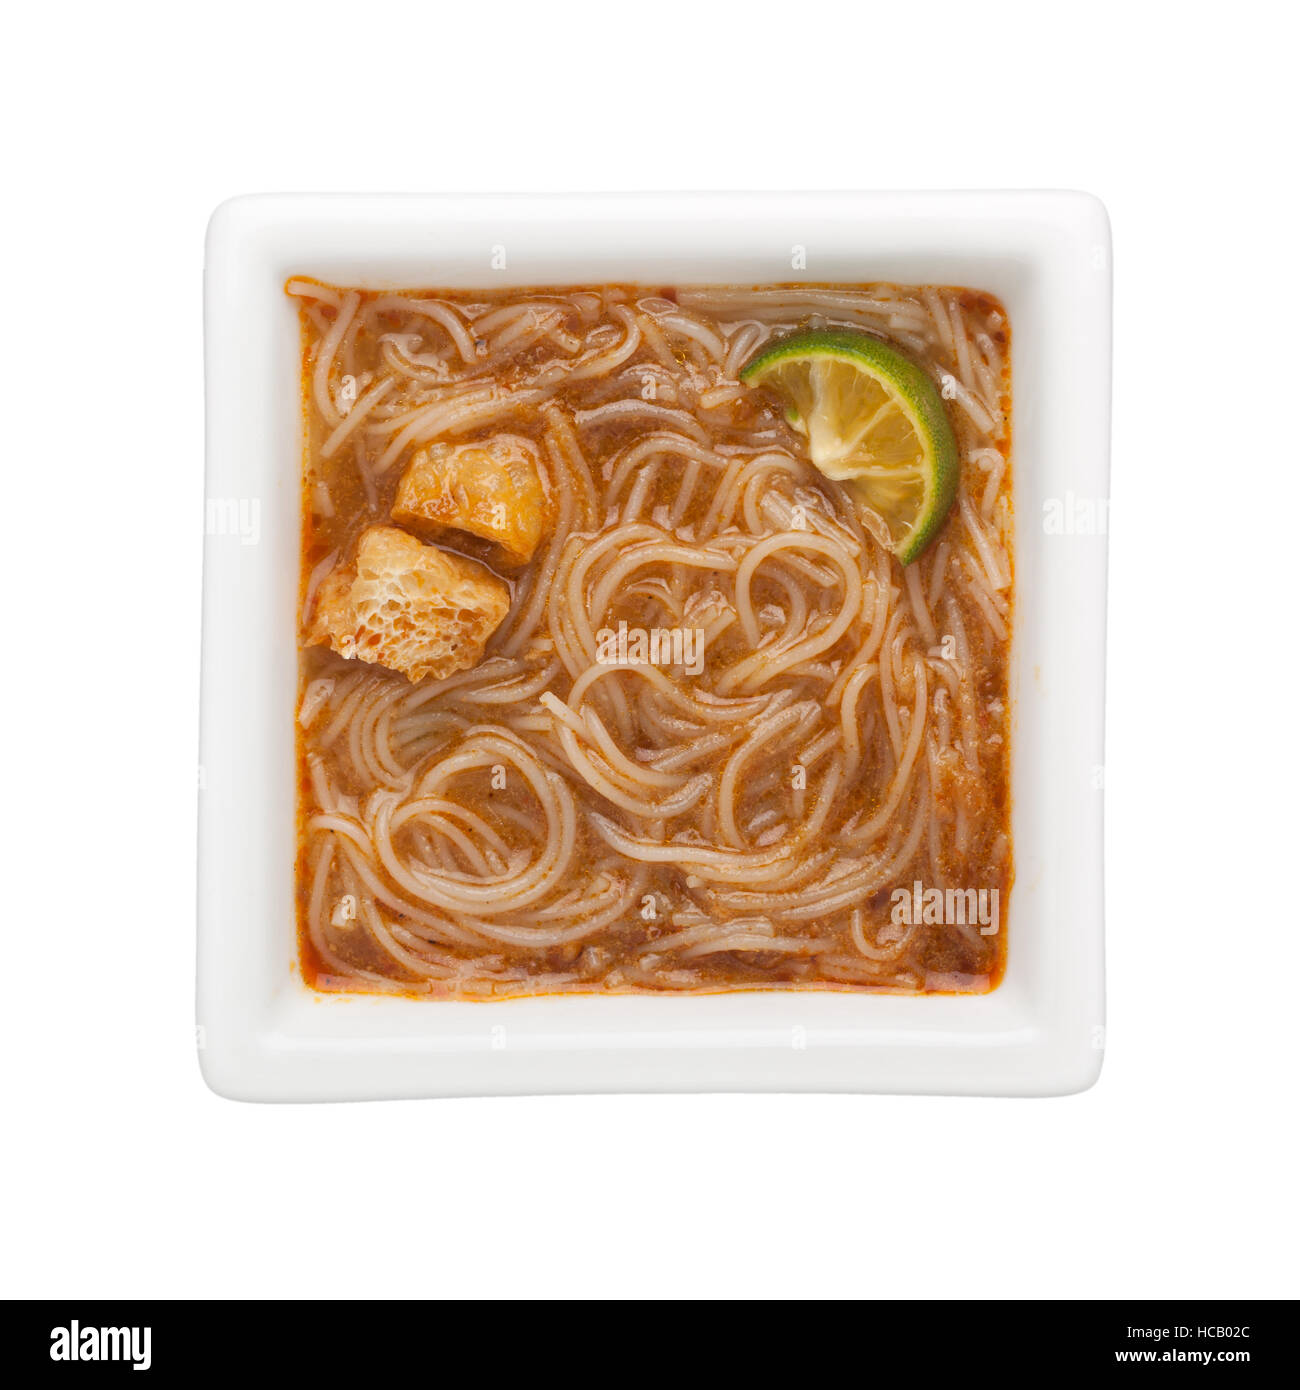 Peranakan food - Mee siam in a square bowl isolated on white background Stock Photo